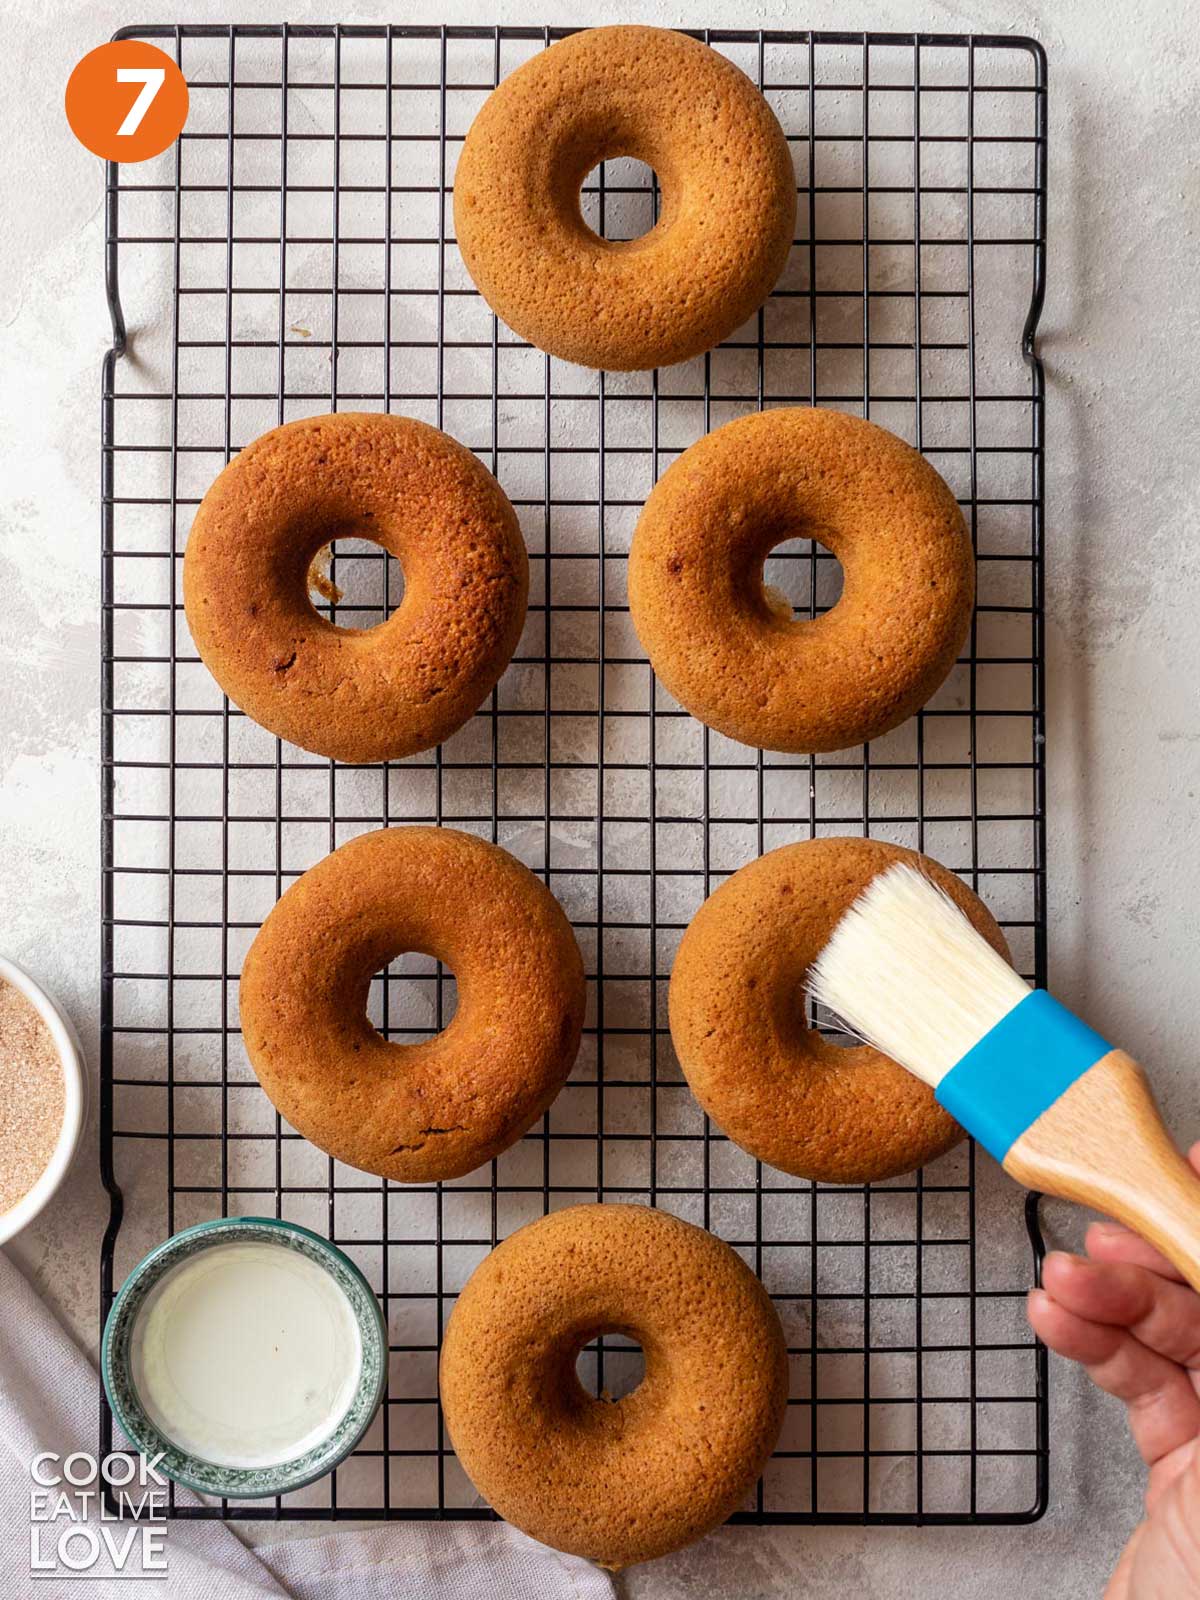 Brushing donuts with coconut oil.